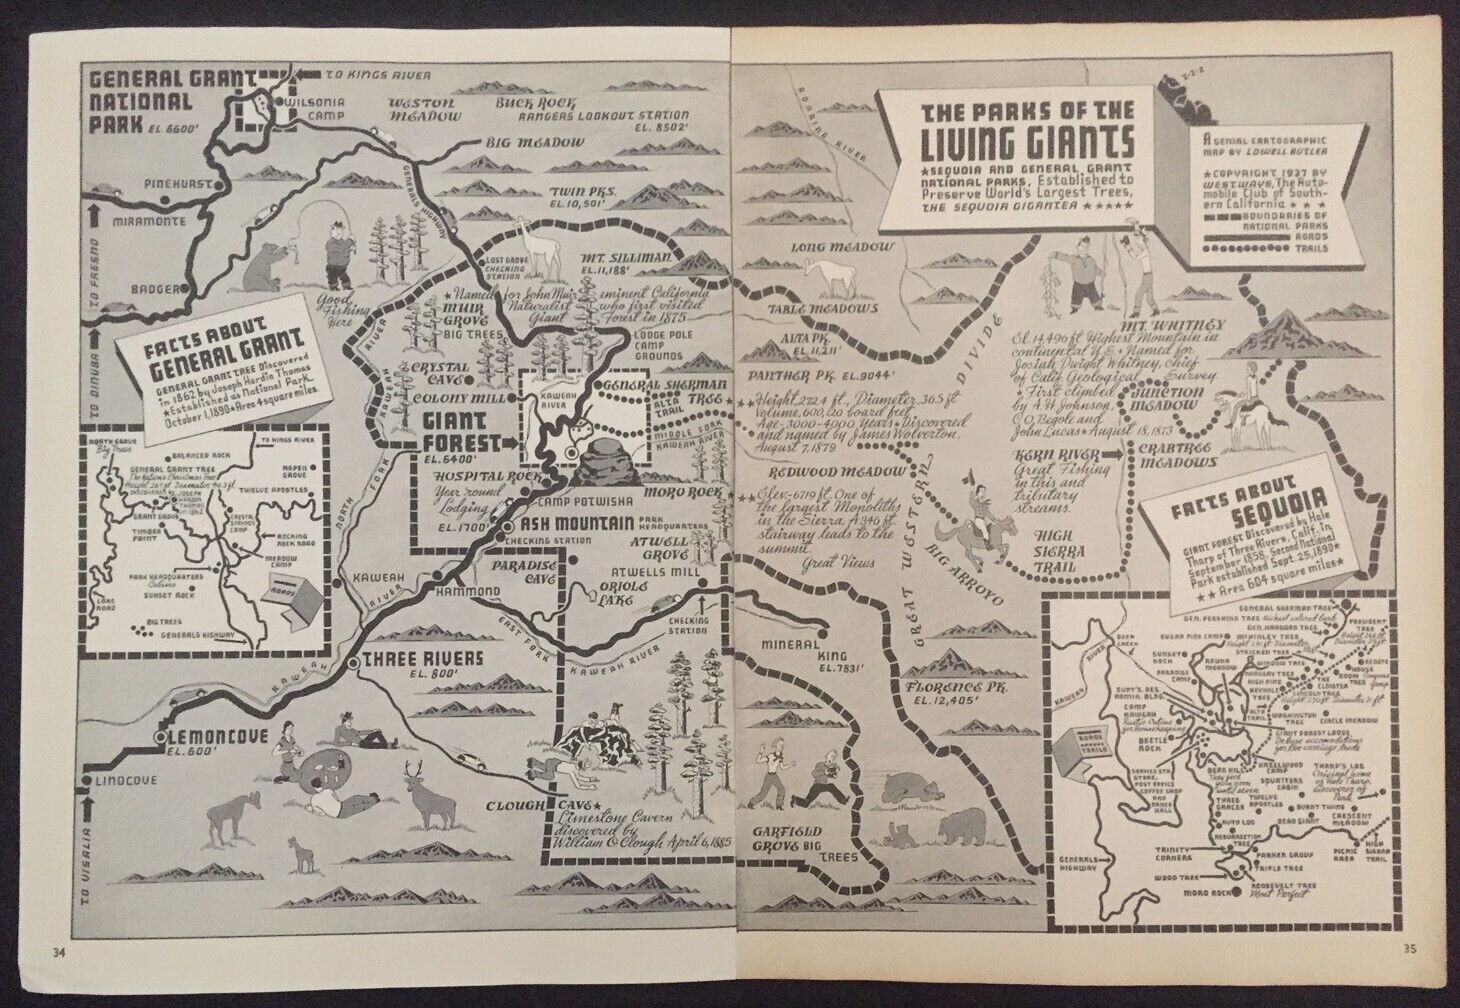 Original 1937 Pictorial Map of the Parks of the Living Giants by Lowell Butler